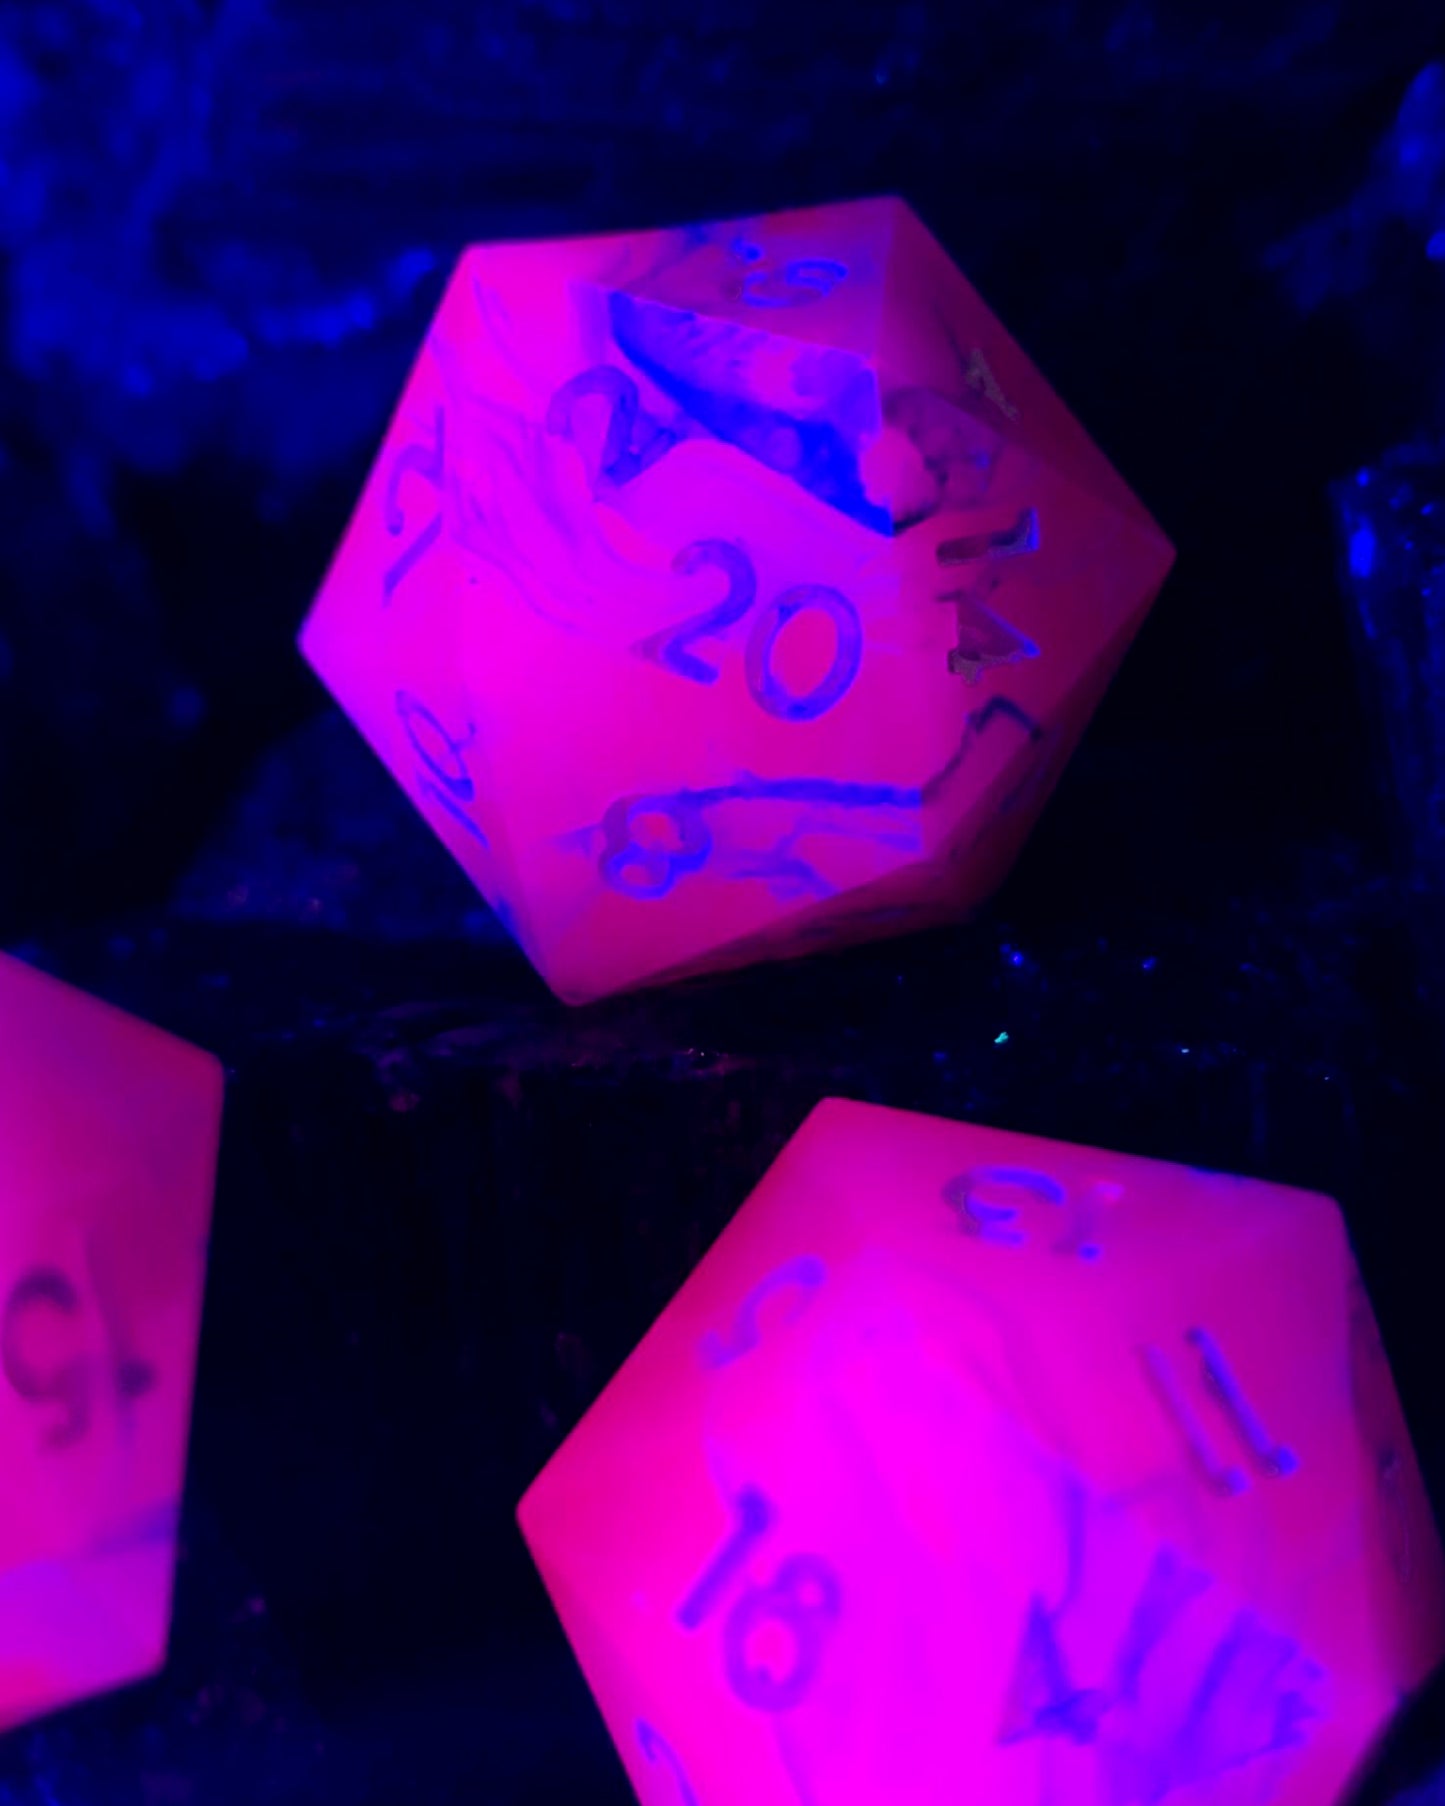 Bardic Dreams UV Reactive -1 D20 | Handmade Dice | Hand Crafted Dungeons and Dragons Dice